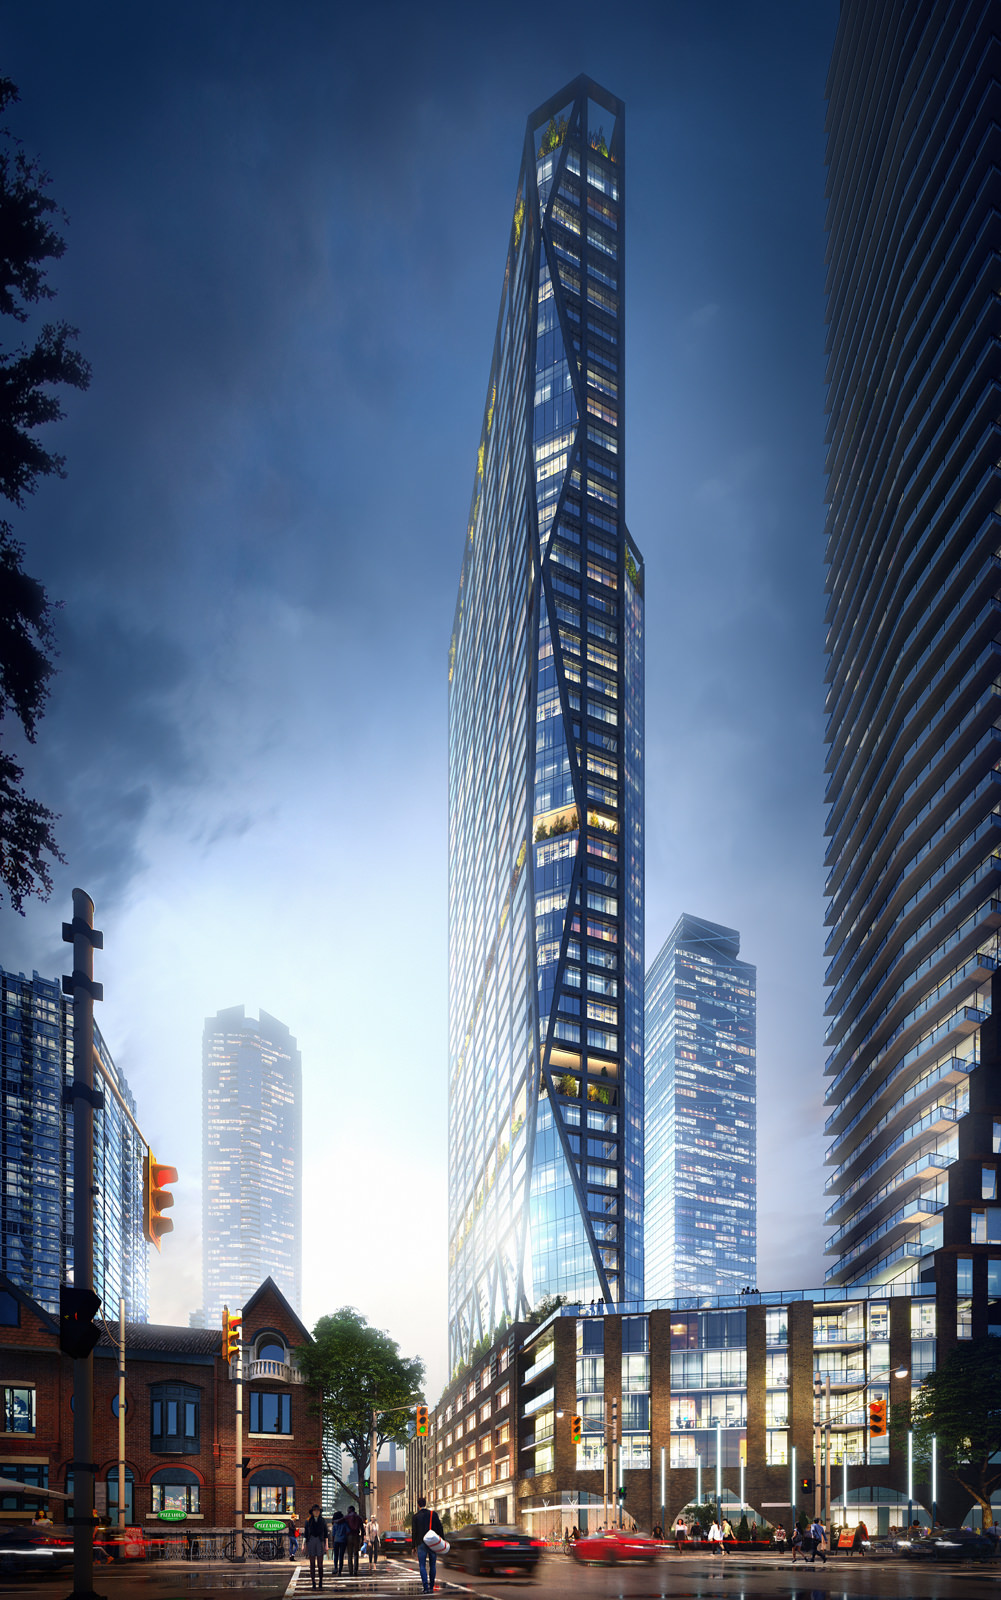 High-end architectural 3D rendering portfolio of cut-edge skyscraper project in Toronto city, Canada, context visualized from street level